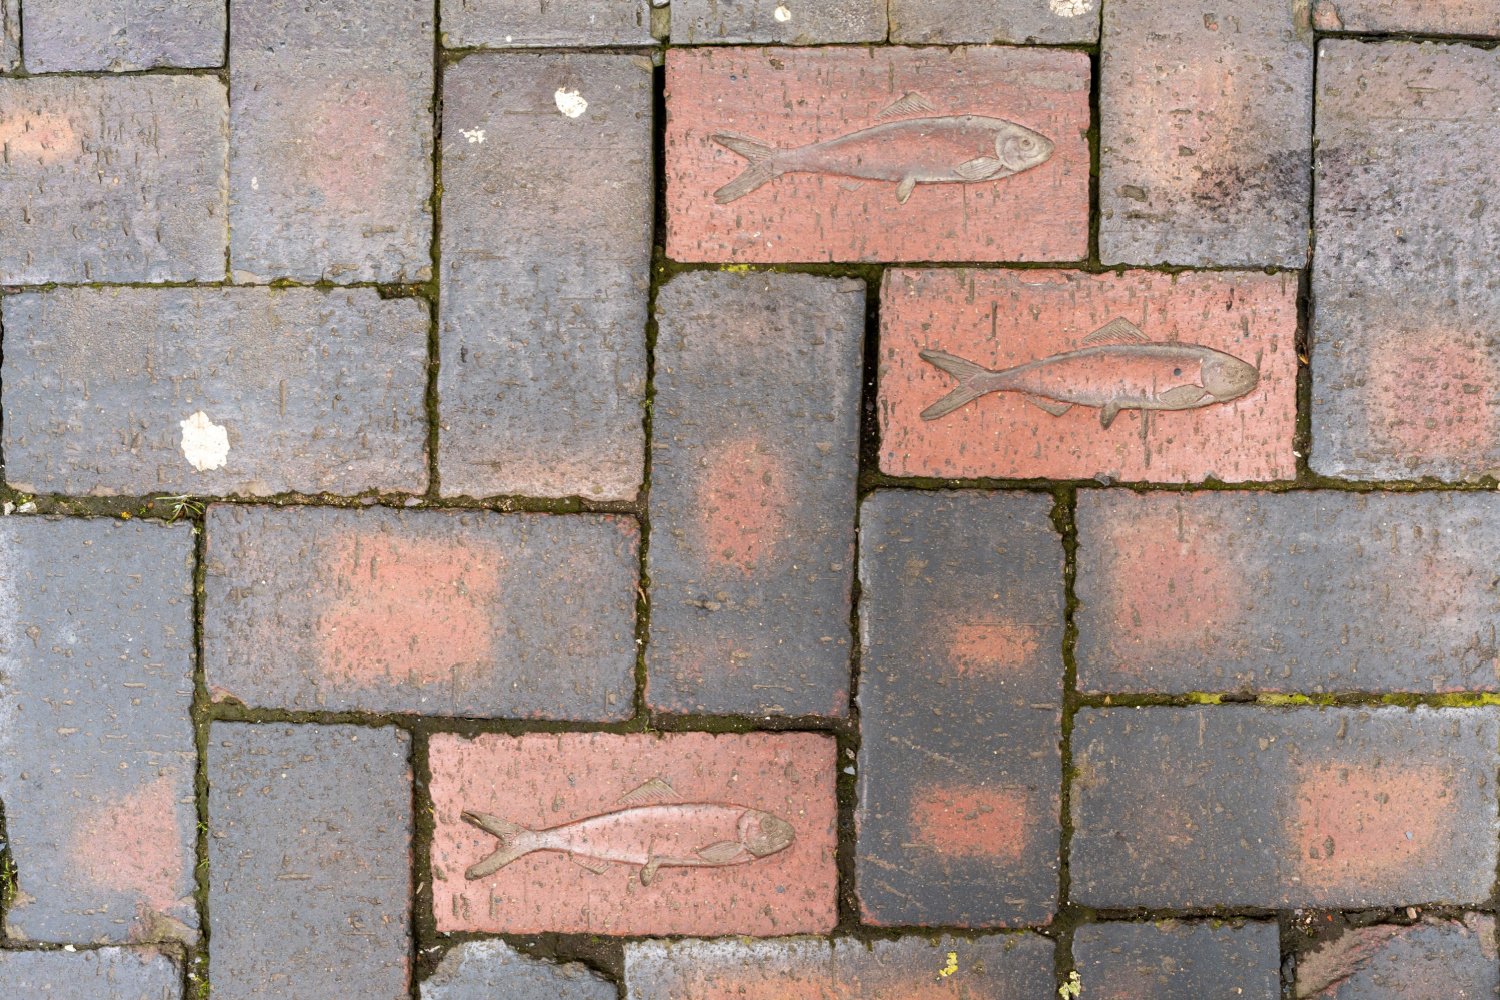 Image name kingston upon hull decorative fish on bricks yorkshire the 3 image from the post Walk: Hull's Fish Trail in Yorkshire.com.